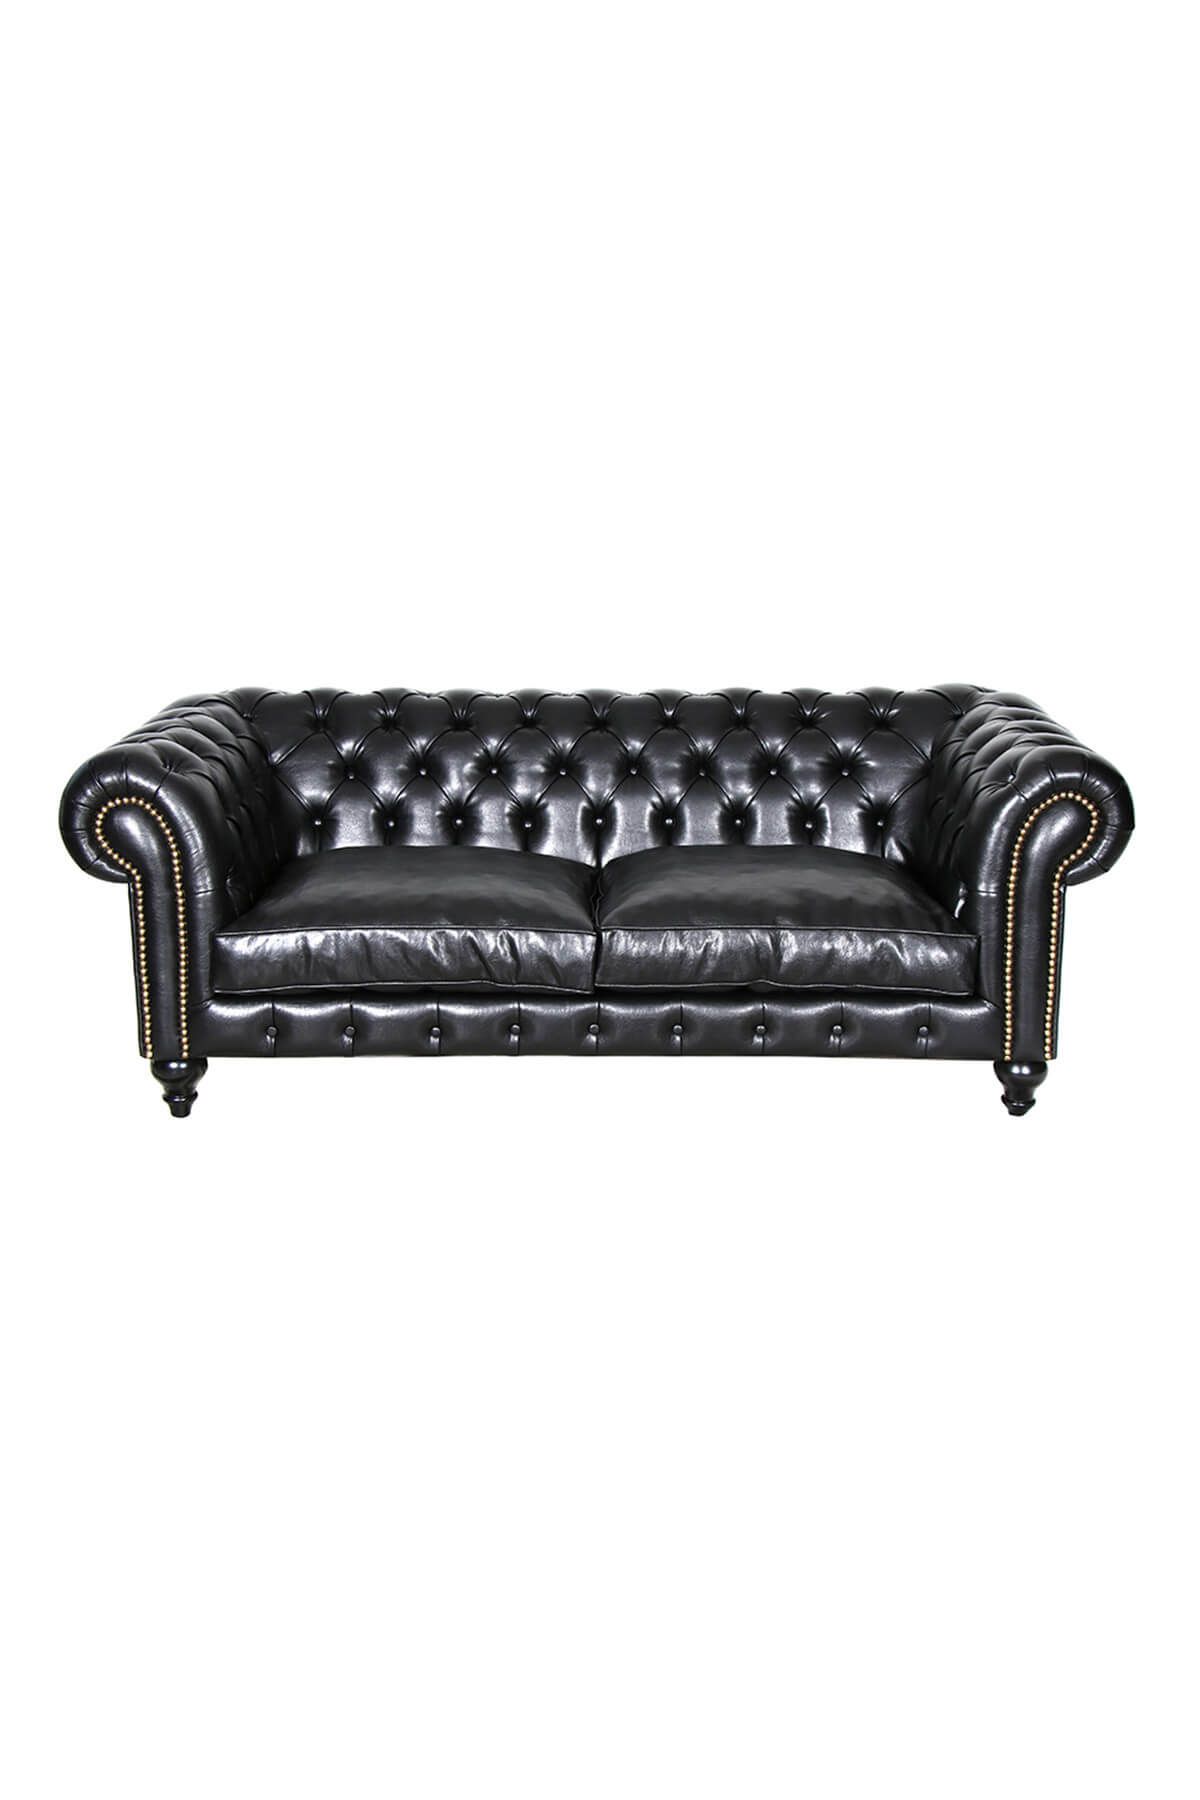 3A Mobilya Class Black Leather Chesterfield